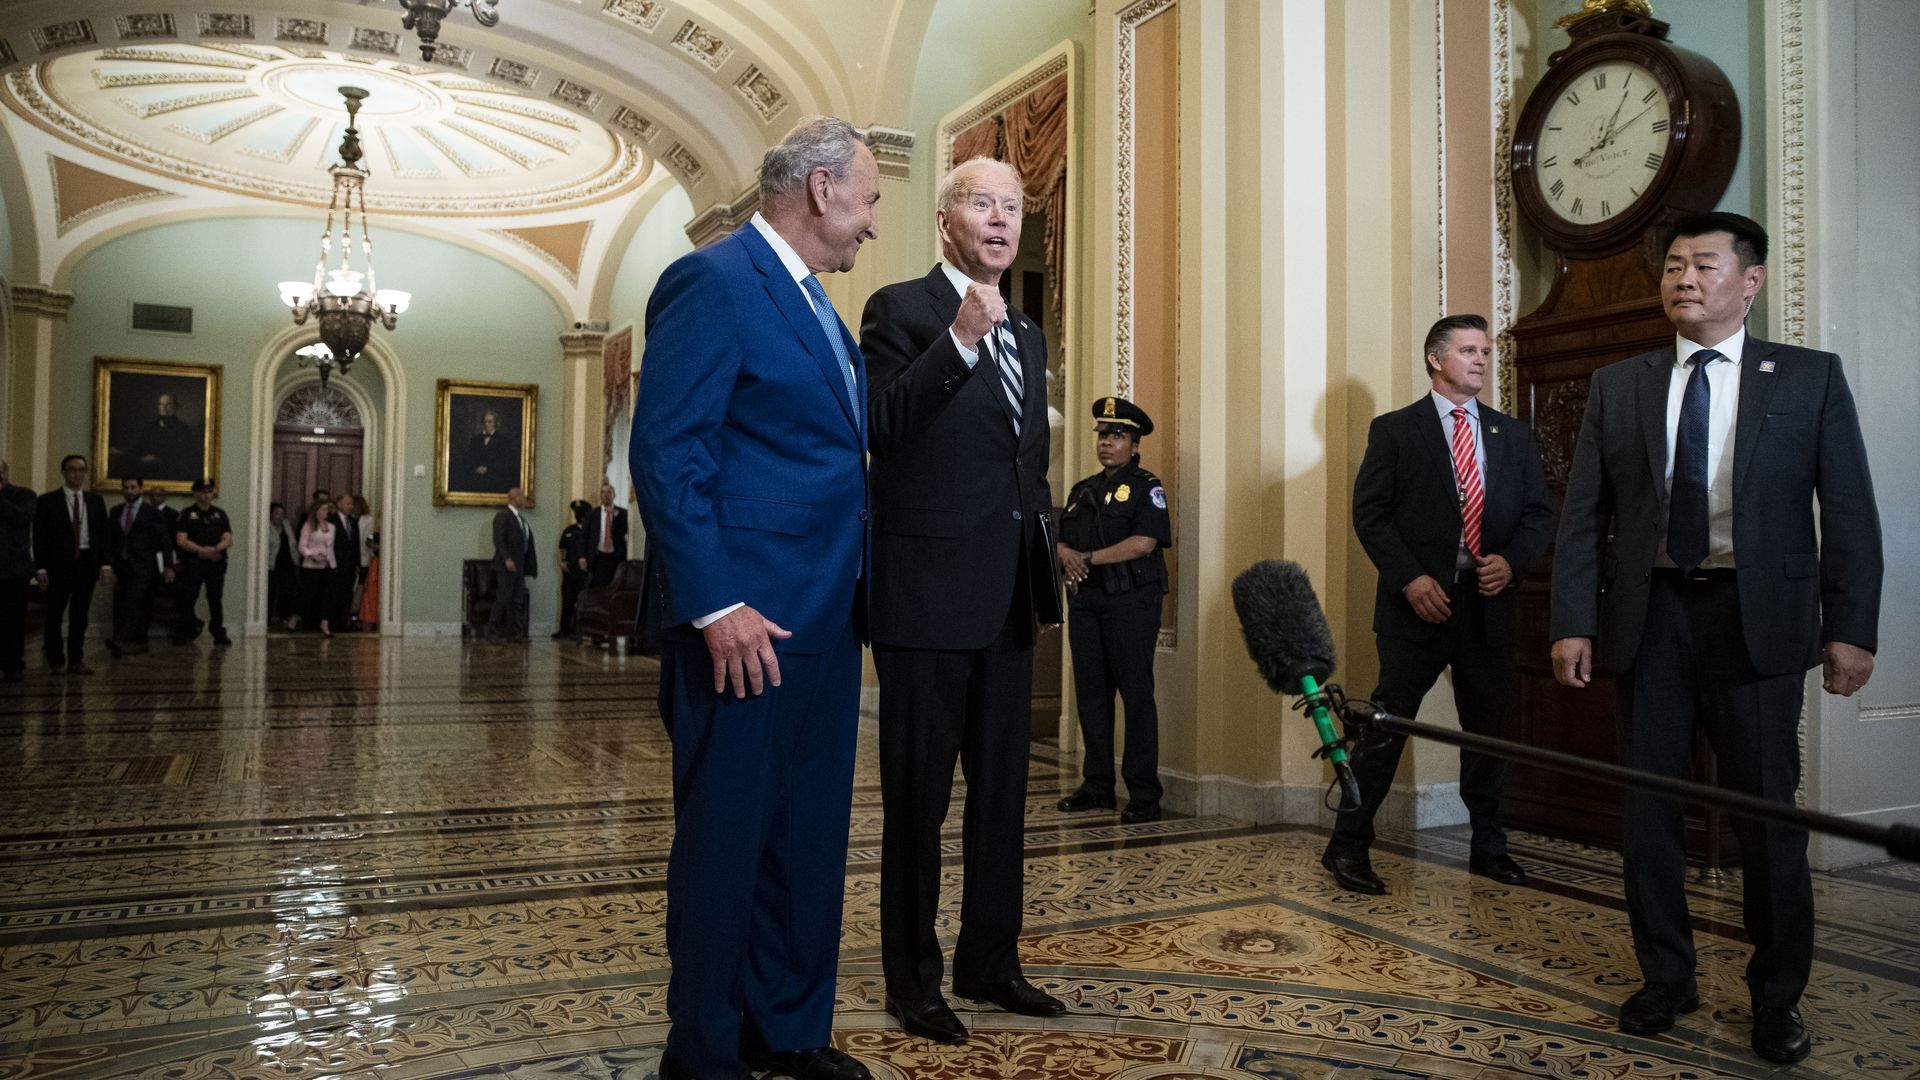 President Biden is seen standing next to the Ohio Clock as he returned to the Capitol to meet with Senate Democrats.